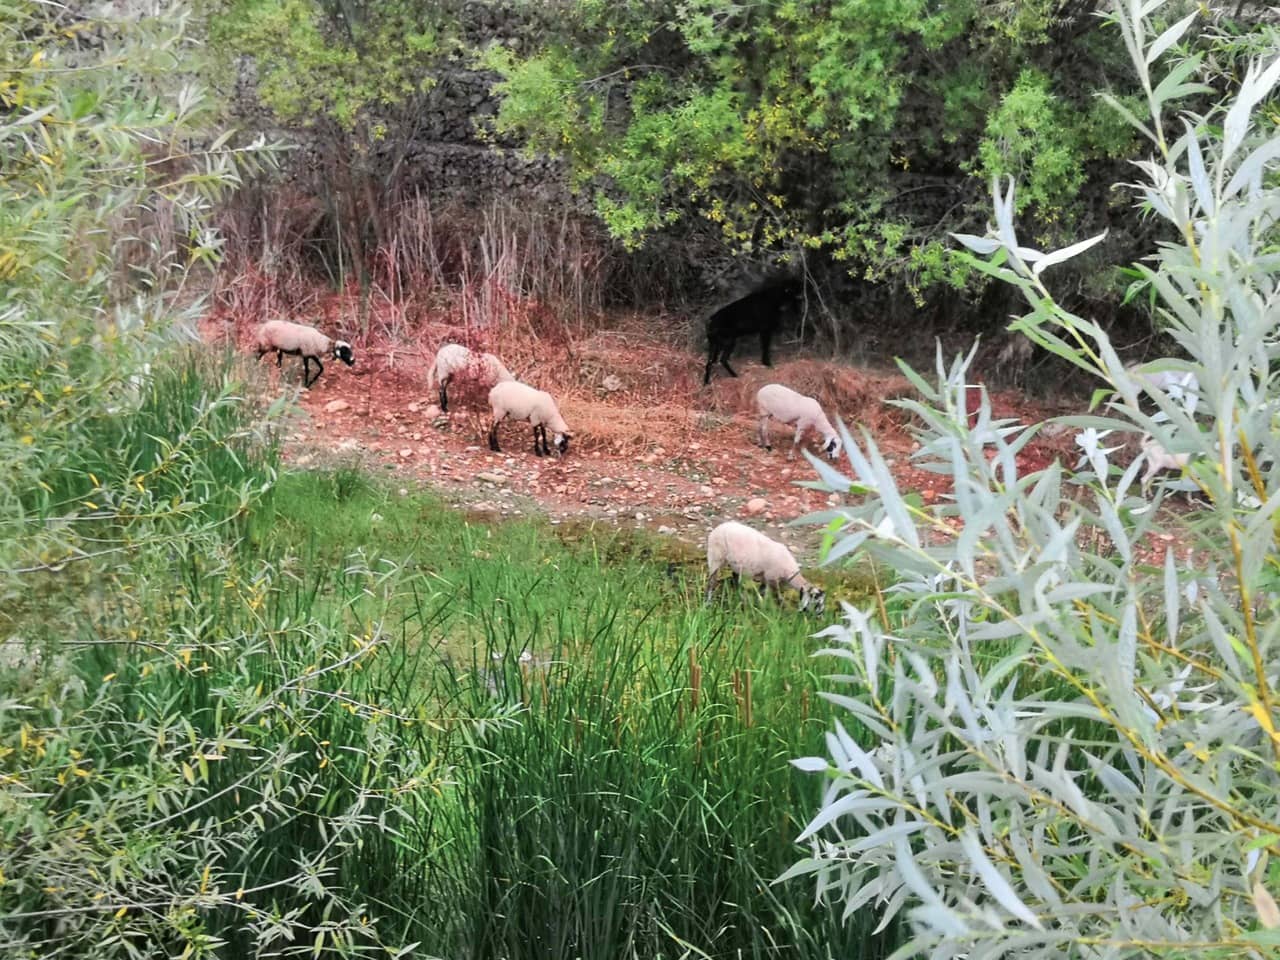 Sheep grazing in a river valley